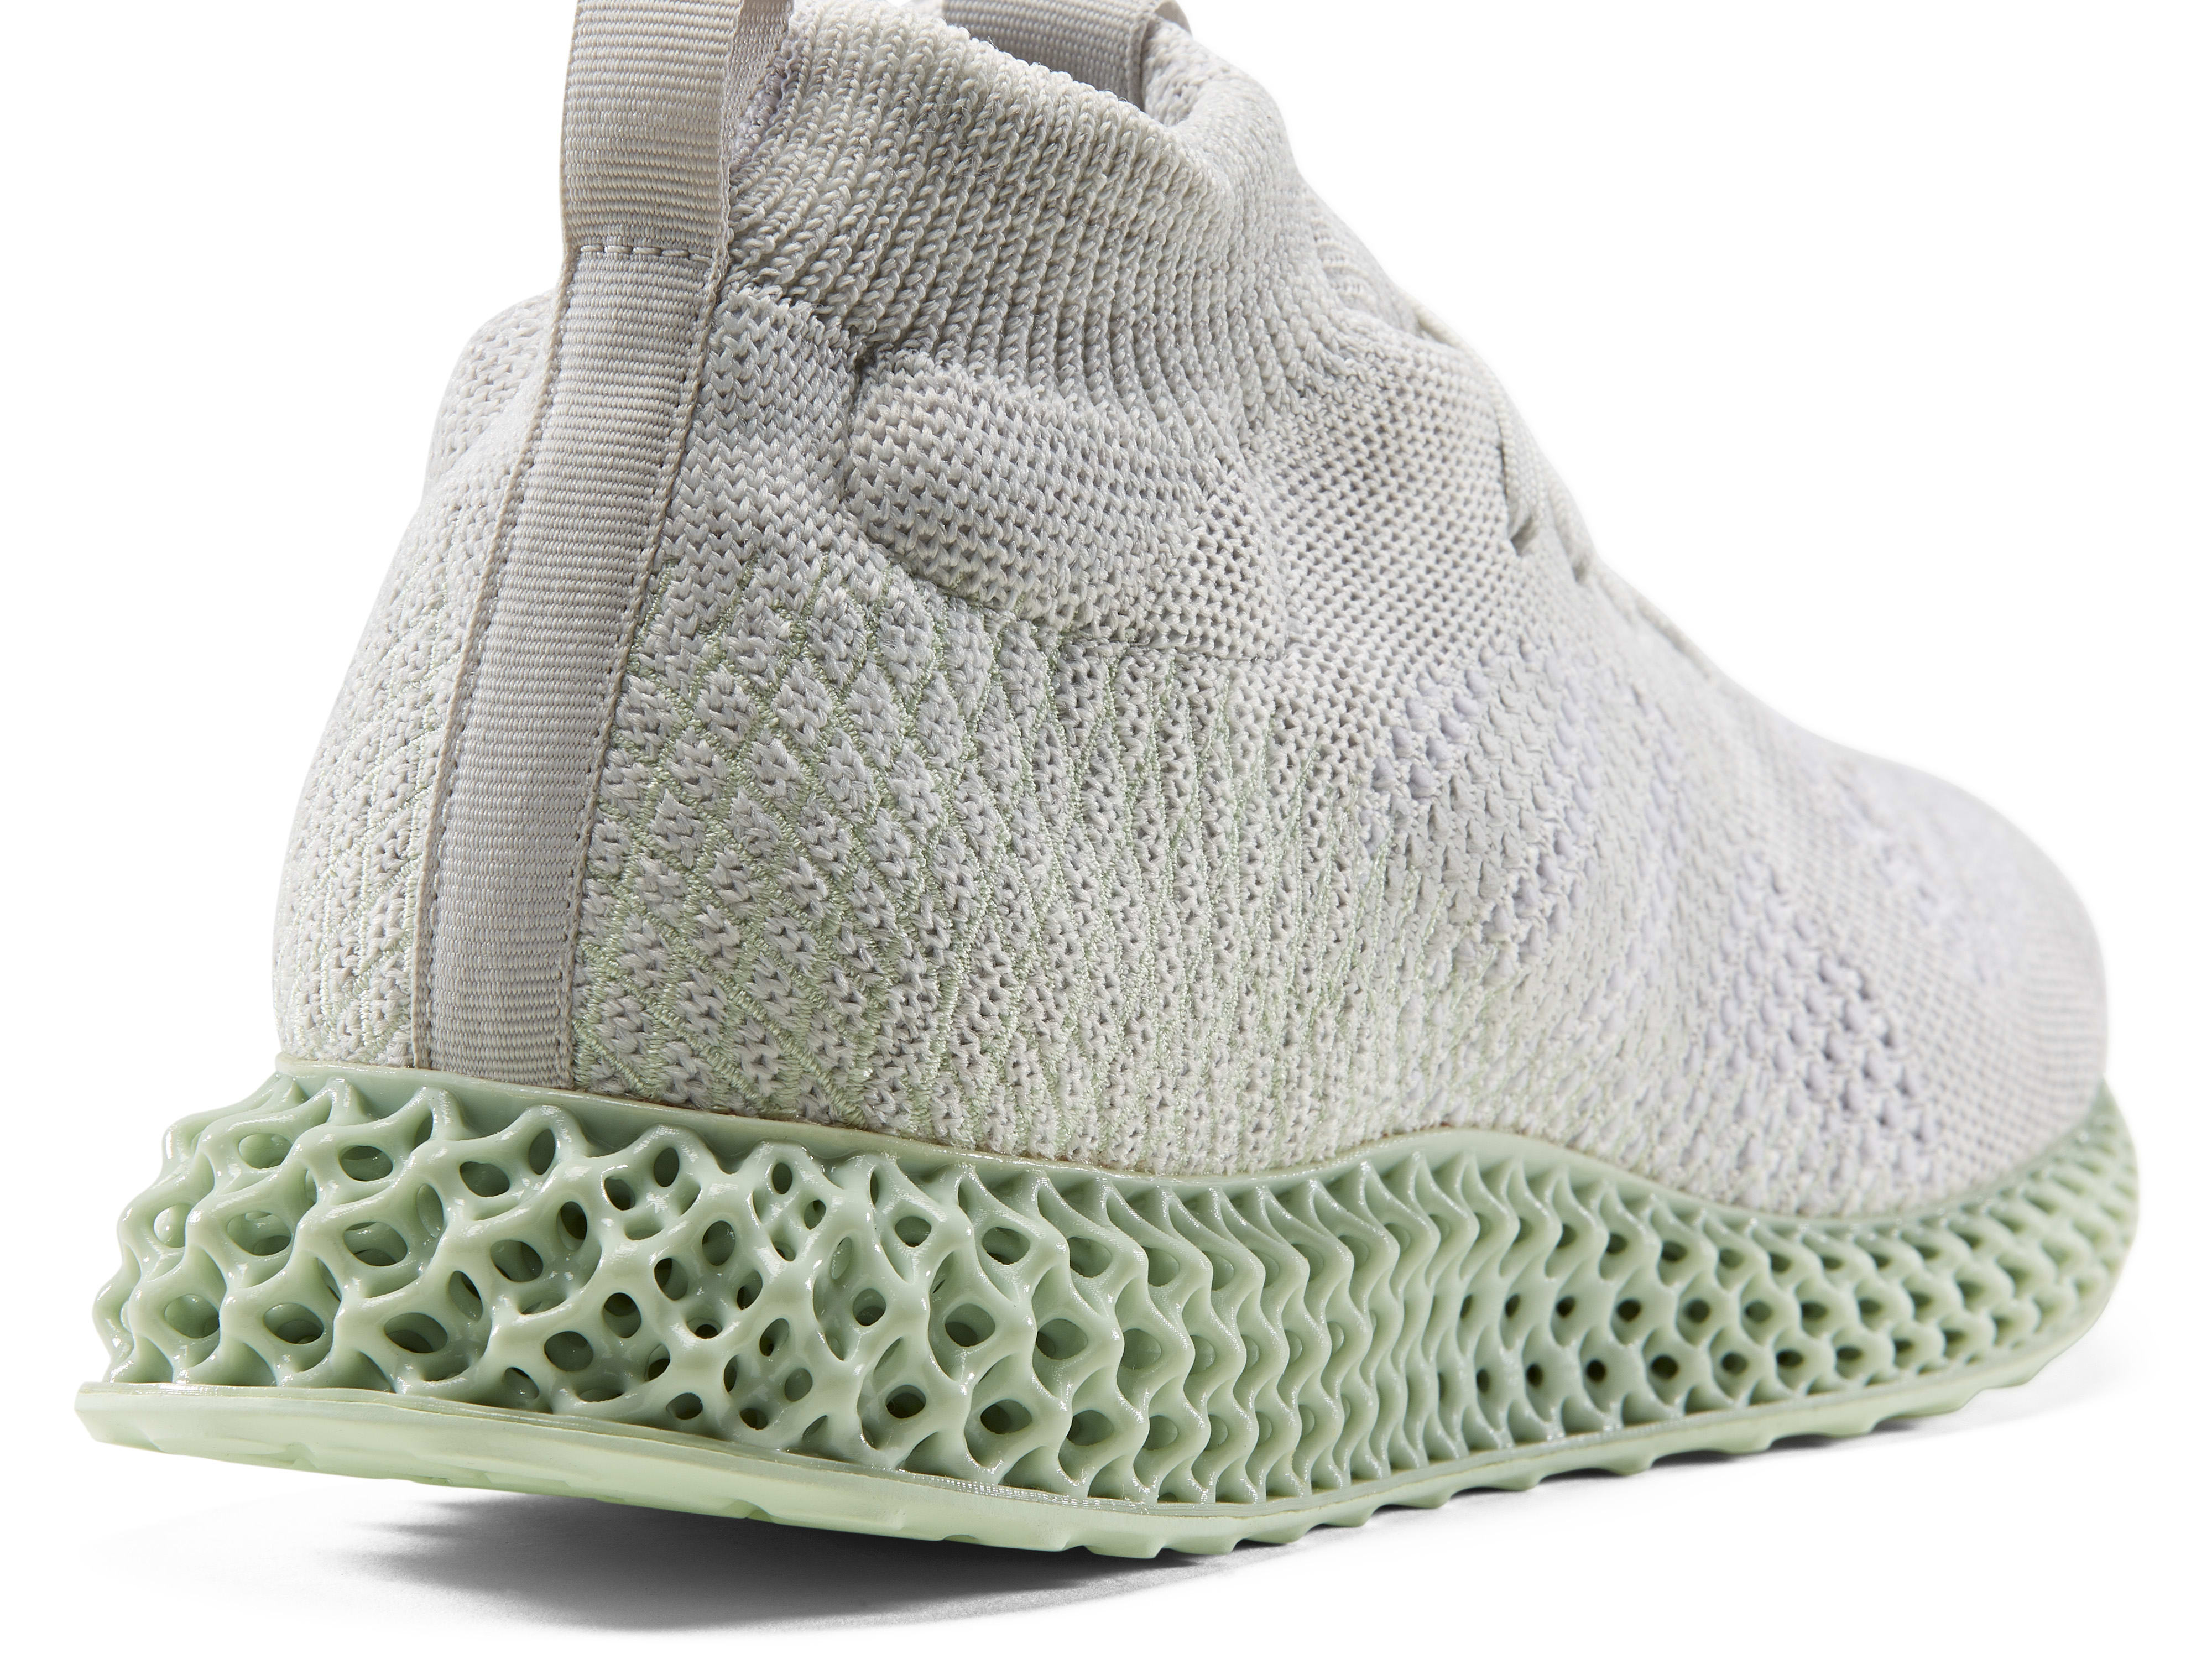 article currency growth Adidas Consortium Runner 4D Mid 'White' EE4116 Release Date | Sole Collector